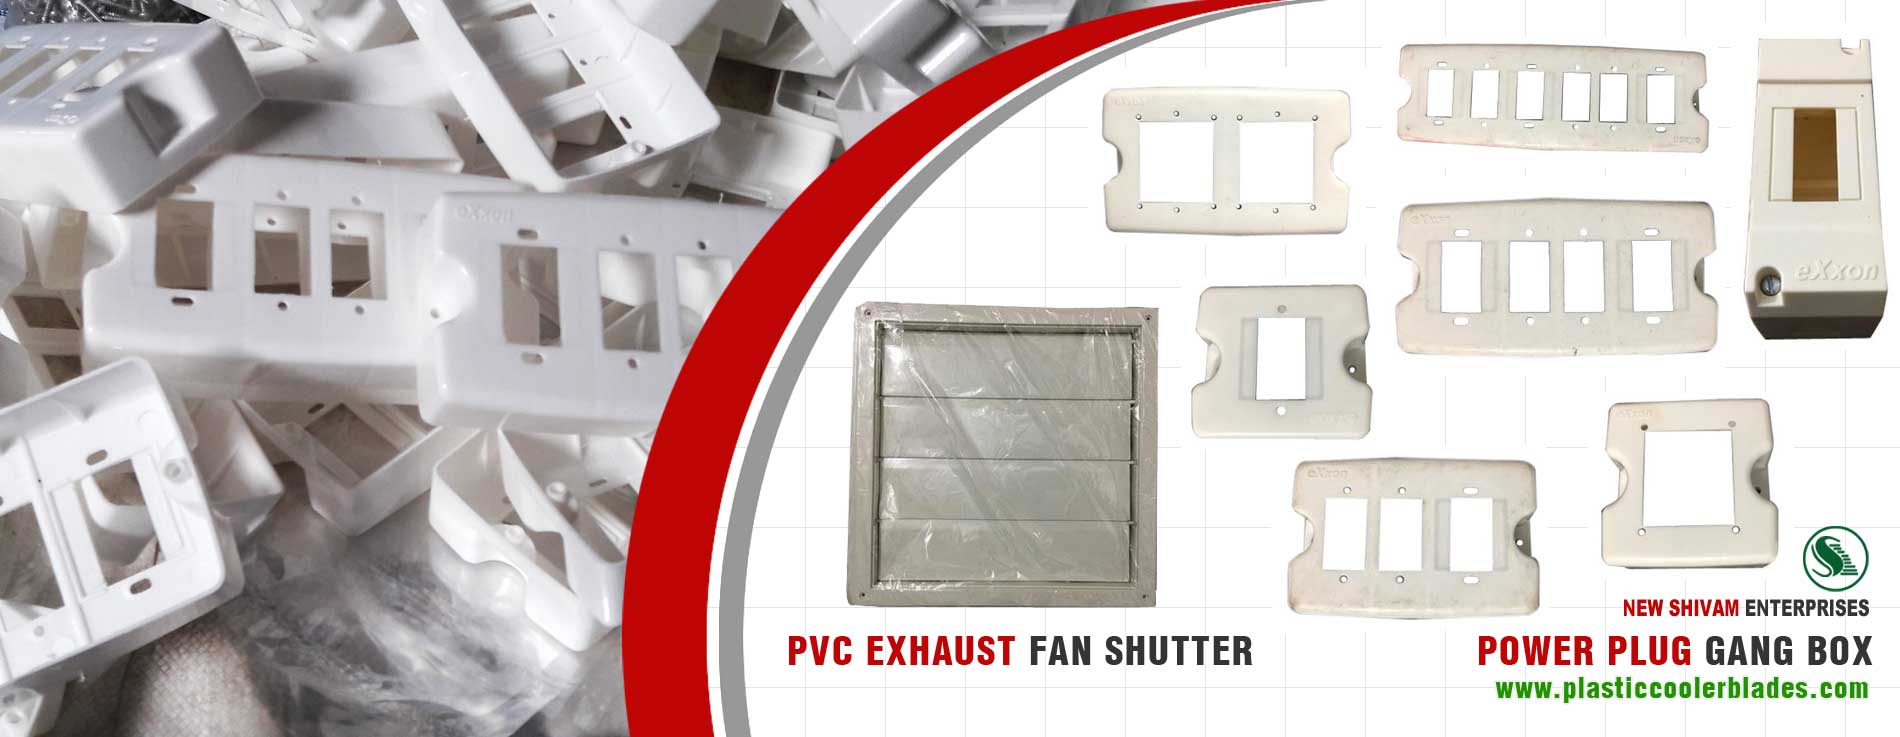 power plug gang plastic box exhaust fan shutter manufacturers suppliers sellers dealers distributors in ludhiana punjab india